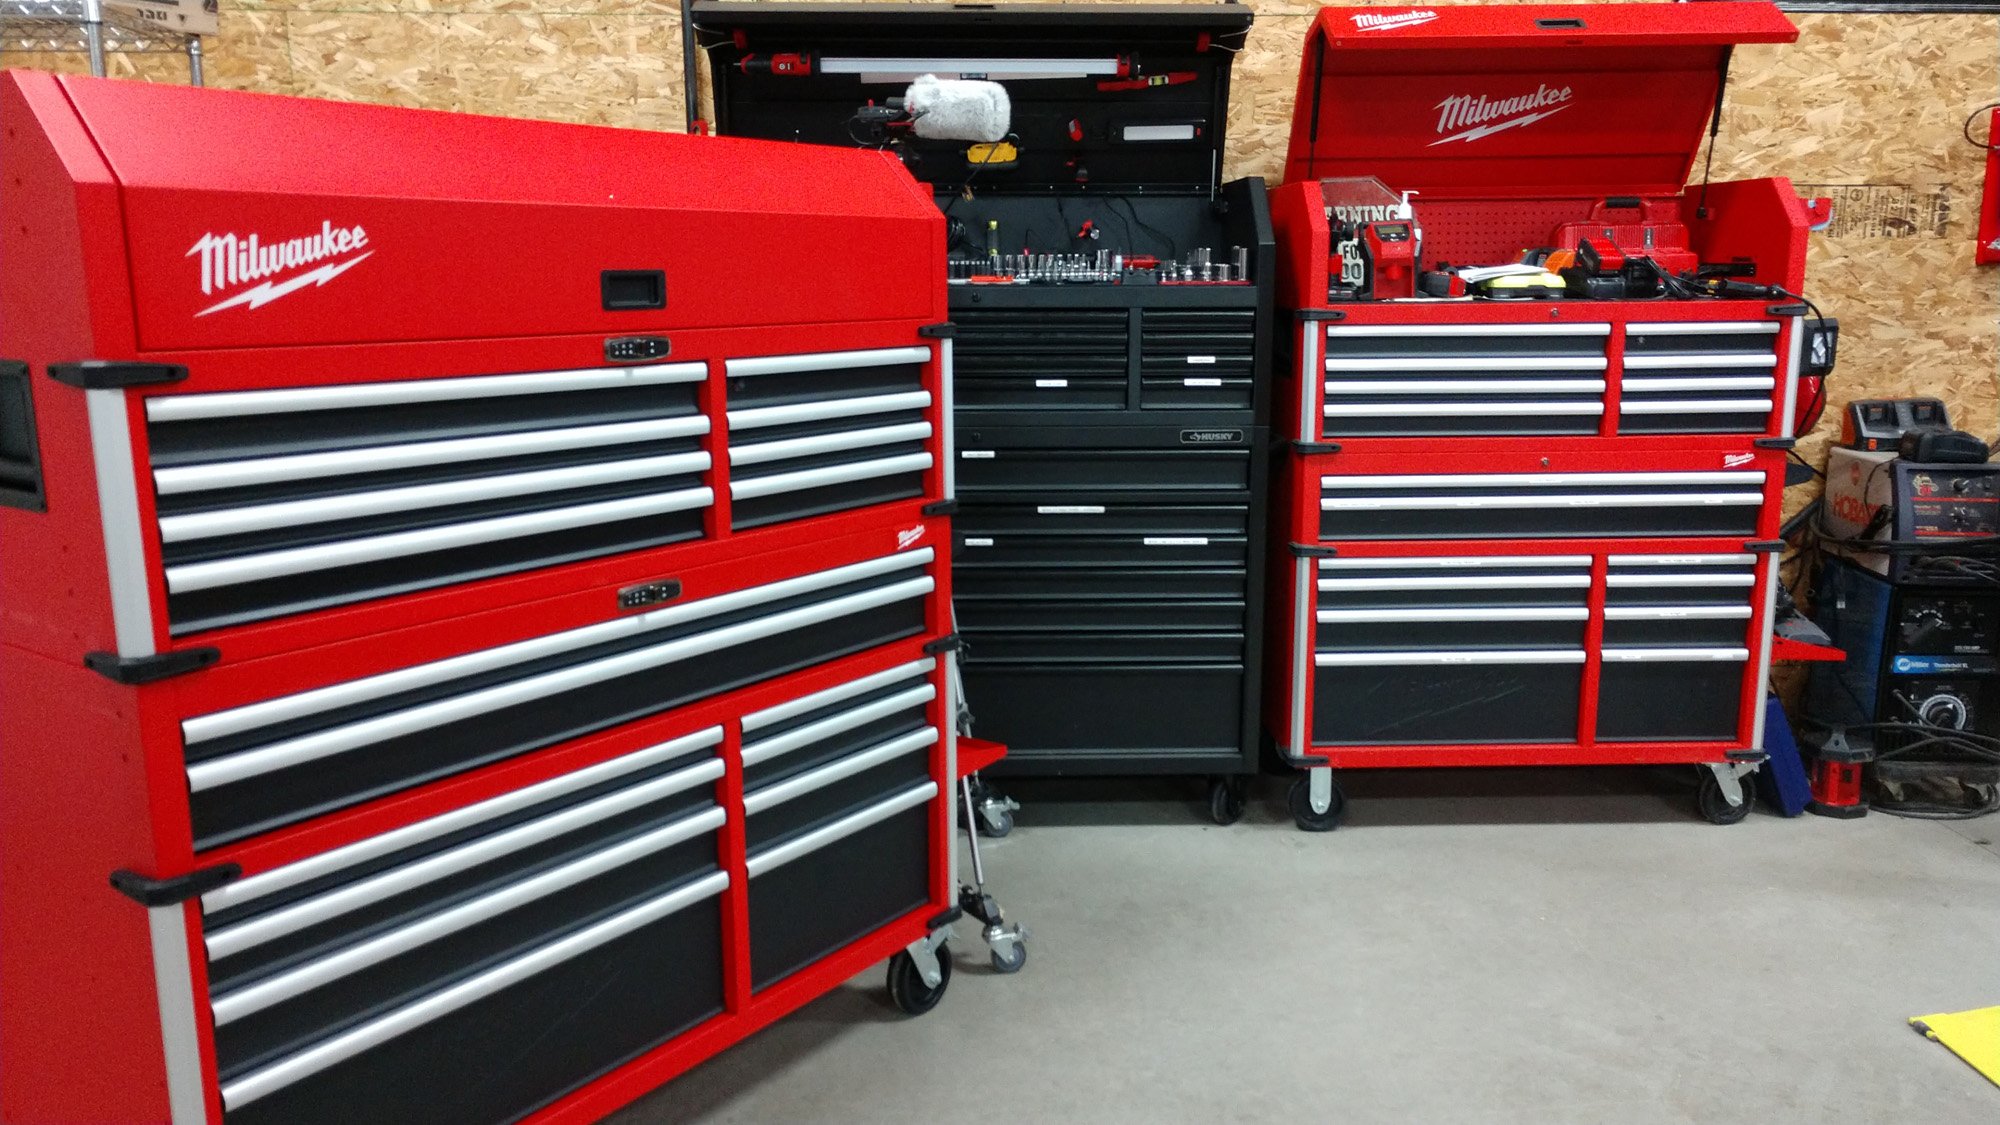 Best Milwaukee Tool Chests Comparison